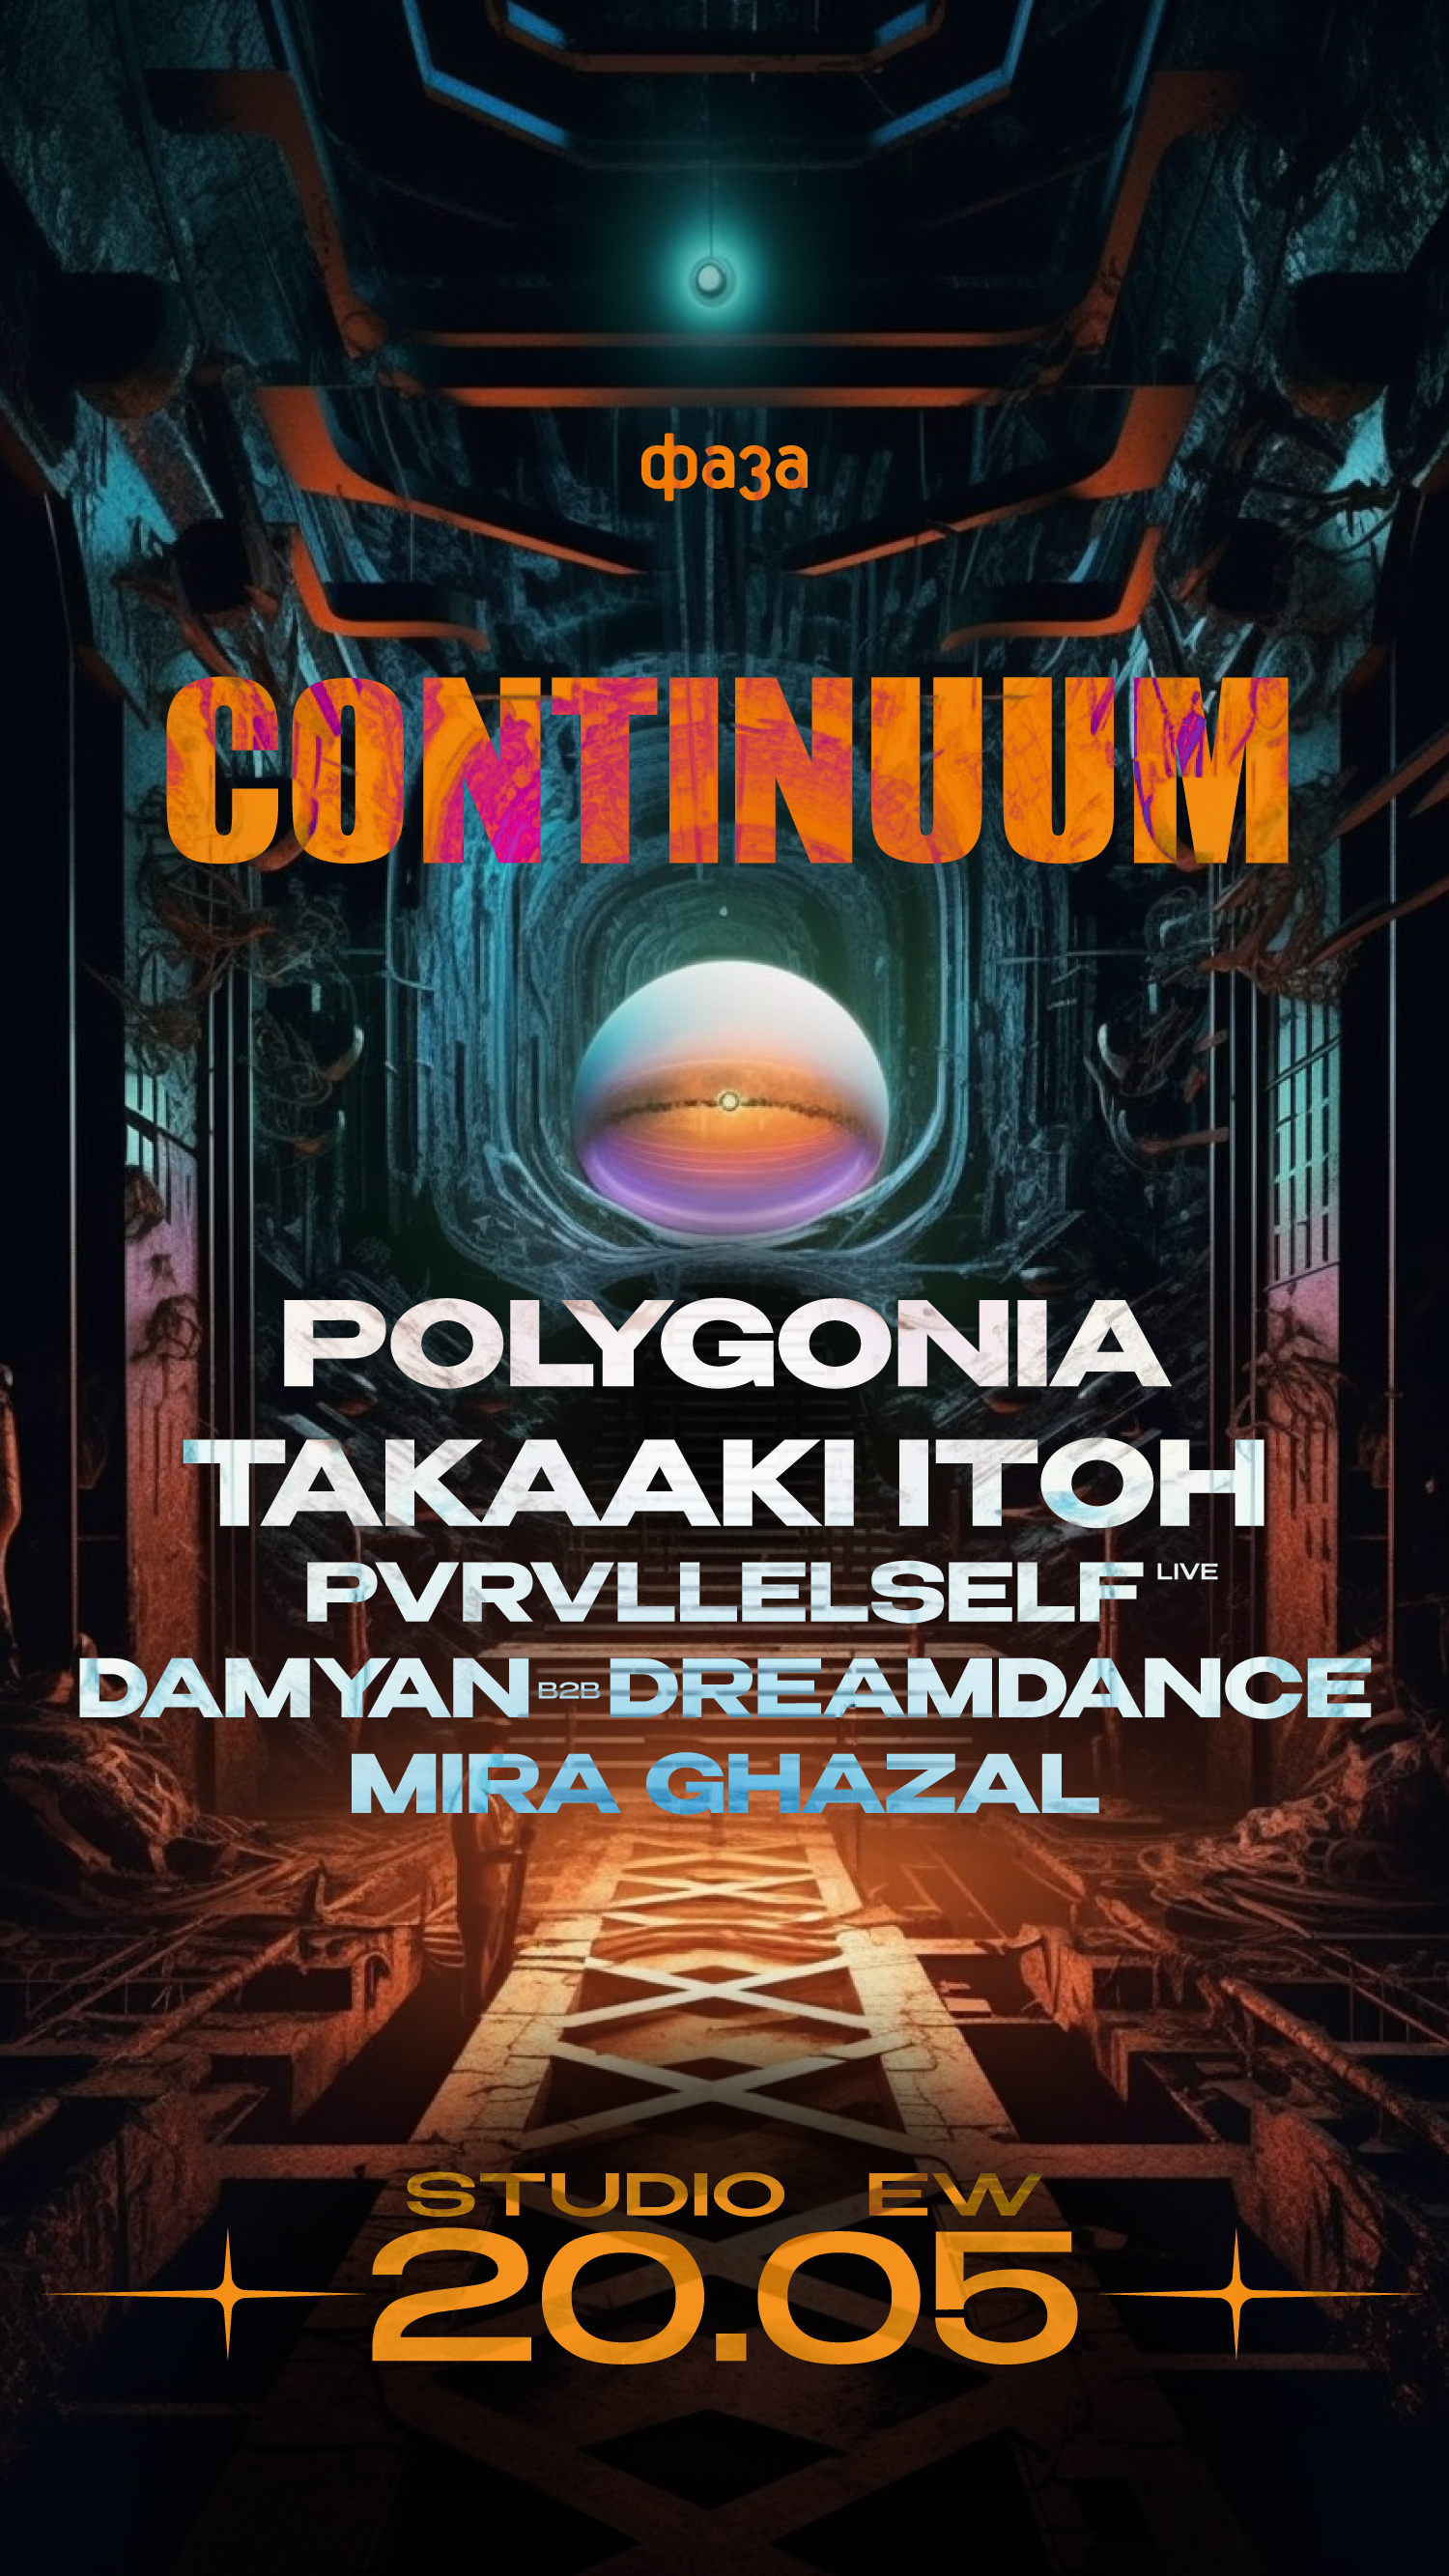 ФАЗА - 𝗖𝗢𝗡𝗧𝗜𝗡𝗨𝗨𝗠 with Takaaki Itoh, Polygonia - フライヤー裏